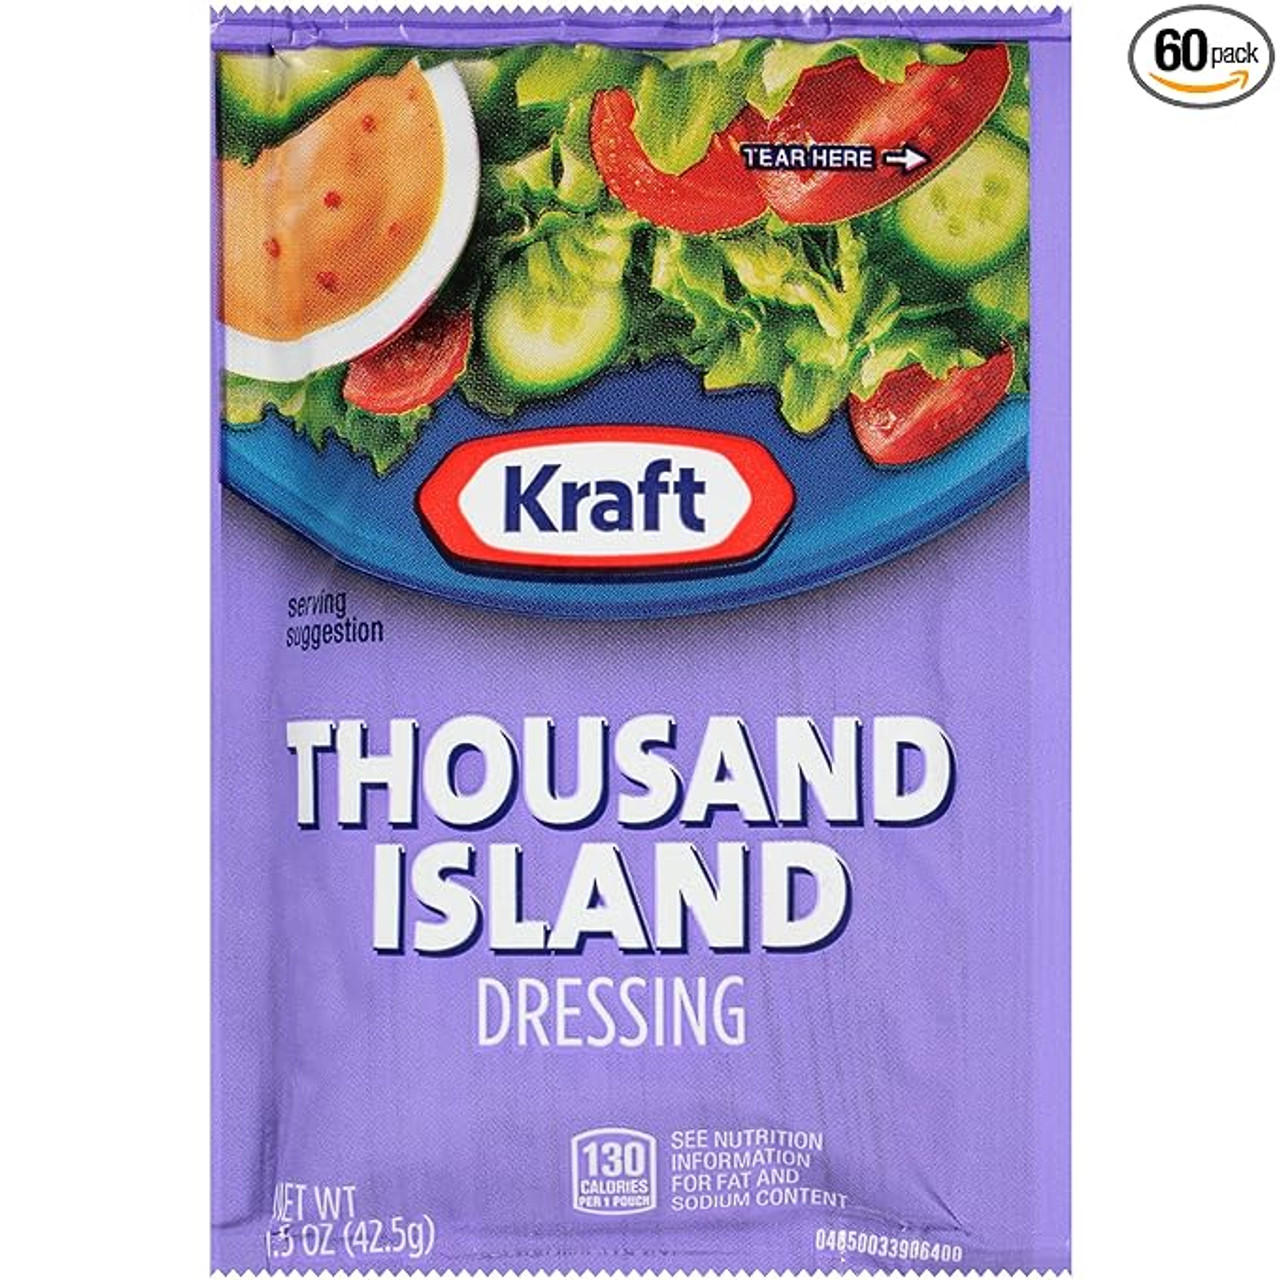 Kraft Thousand Island Dressing Packet - 1.5 oz. (60/Case), Robust Tanginess - Chicken Pieces